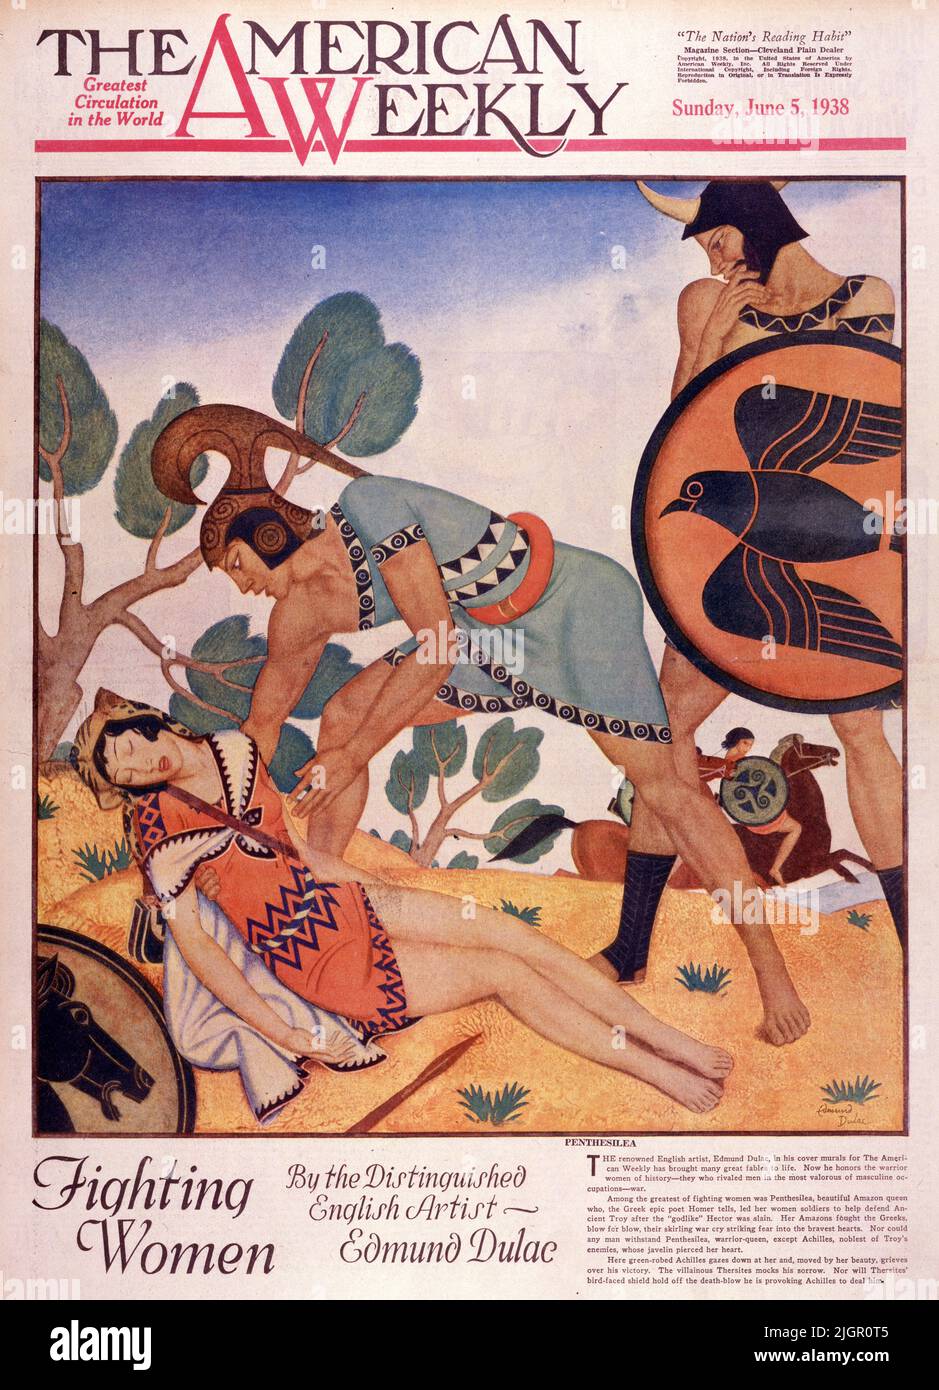 'Penthesilia' published June 5, 1938 in the American Weekly Sunday magazine painted by Edmund Dulac. Among the greatest of fighting women was Penthesilea, beautiful amazon Queen who, the Greek epic poet Homer tells, led her women soldiers to help defend Ancient Troy after the godlike Hector was slain. Her Amazons fought the Greeks, blow for blow, their skirling war cry striking fear in the bravest of hearts. Nor could any man withstand Penthesilea, warrior queen, except Achilles, noblest of Troy’s enemies, whose javelin pierced her heart. Here green robed Achilles gazes down at her. Stock Photo